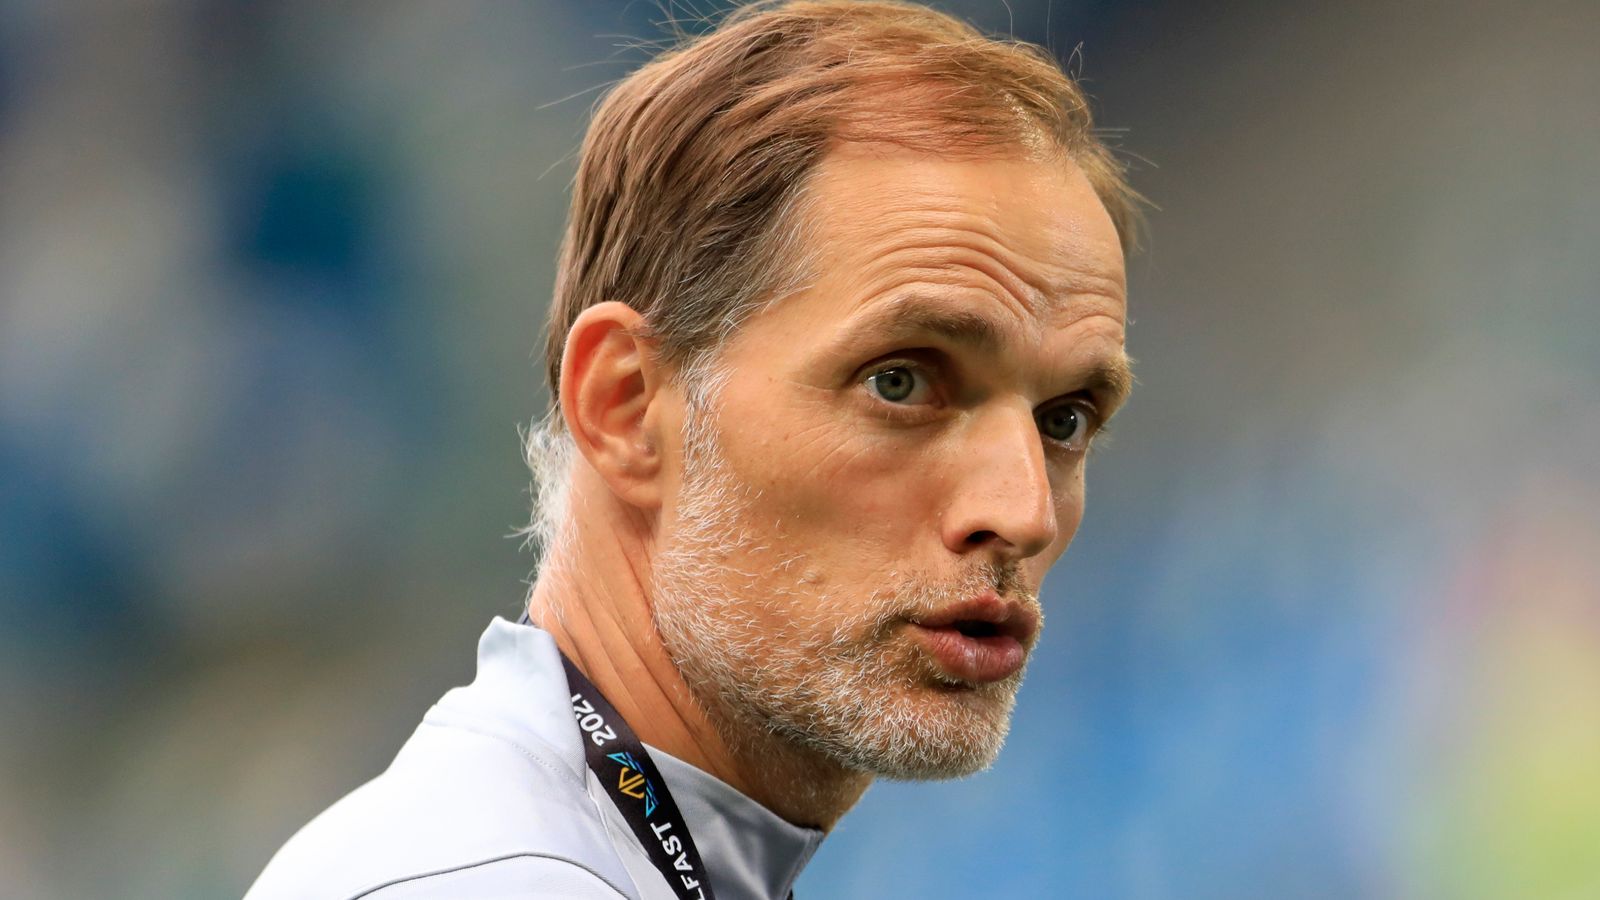 Thomas Tuchel says he asked Chelsea board if they were sure about sacking 'legen..